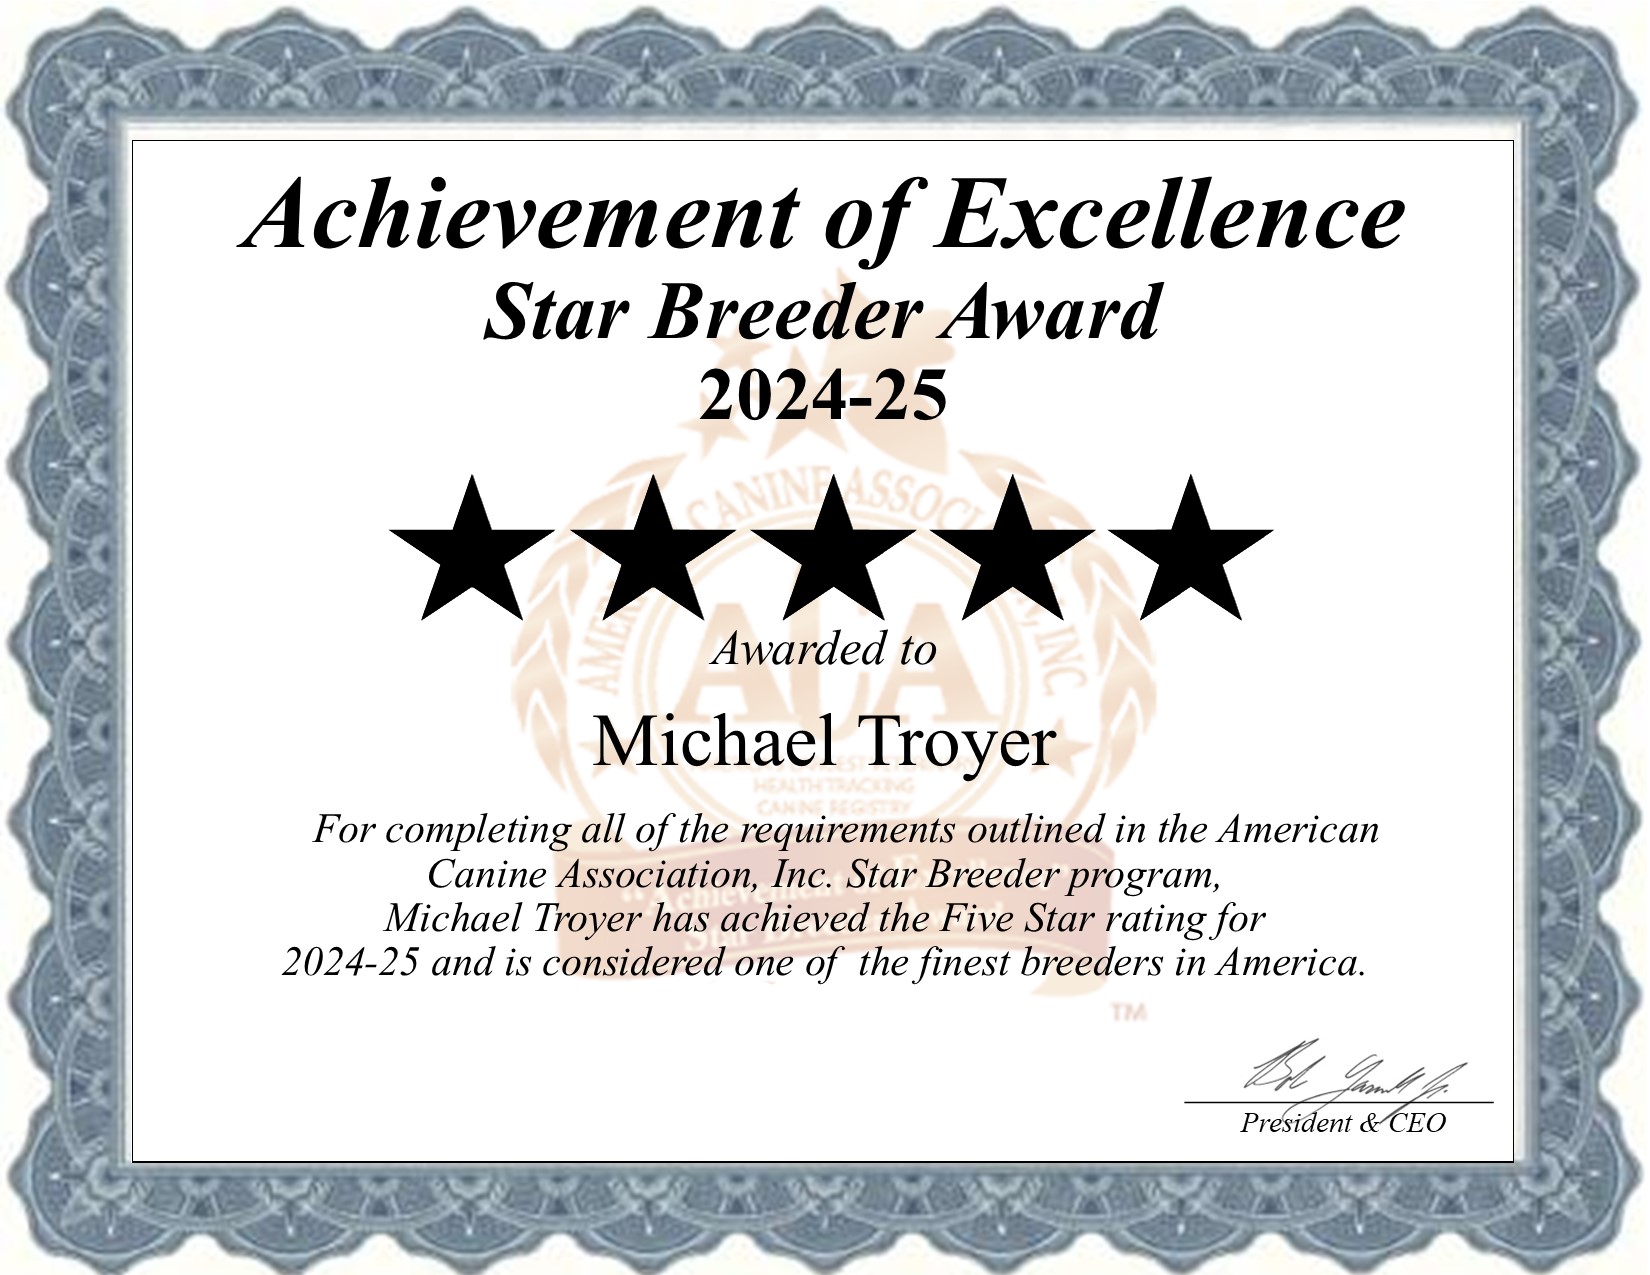 Michael, Troyer, dog, breeder, star, certificate, Michael-Troyer, Fresno, OH, Ohio, puppy, dog, kennels, mill, puppymill, usda, 5-star, aca, ica, registered, Havanese, none